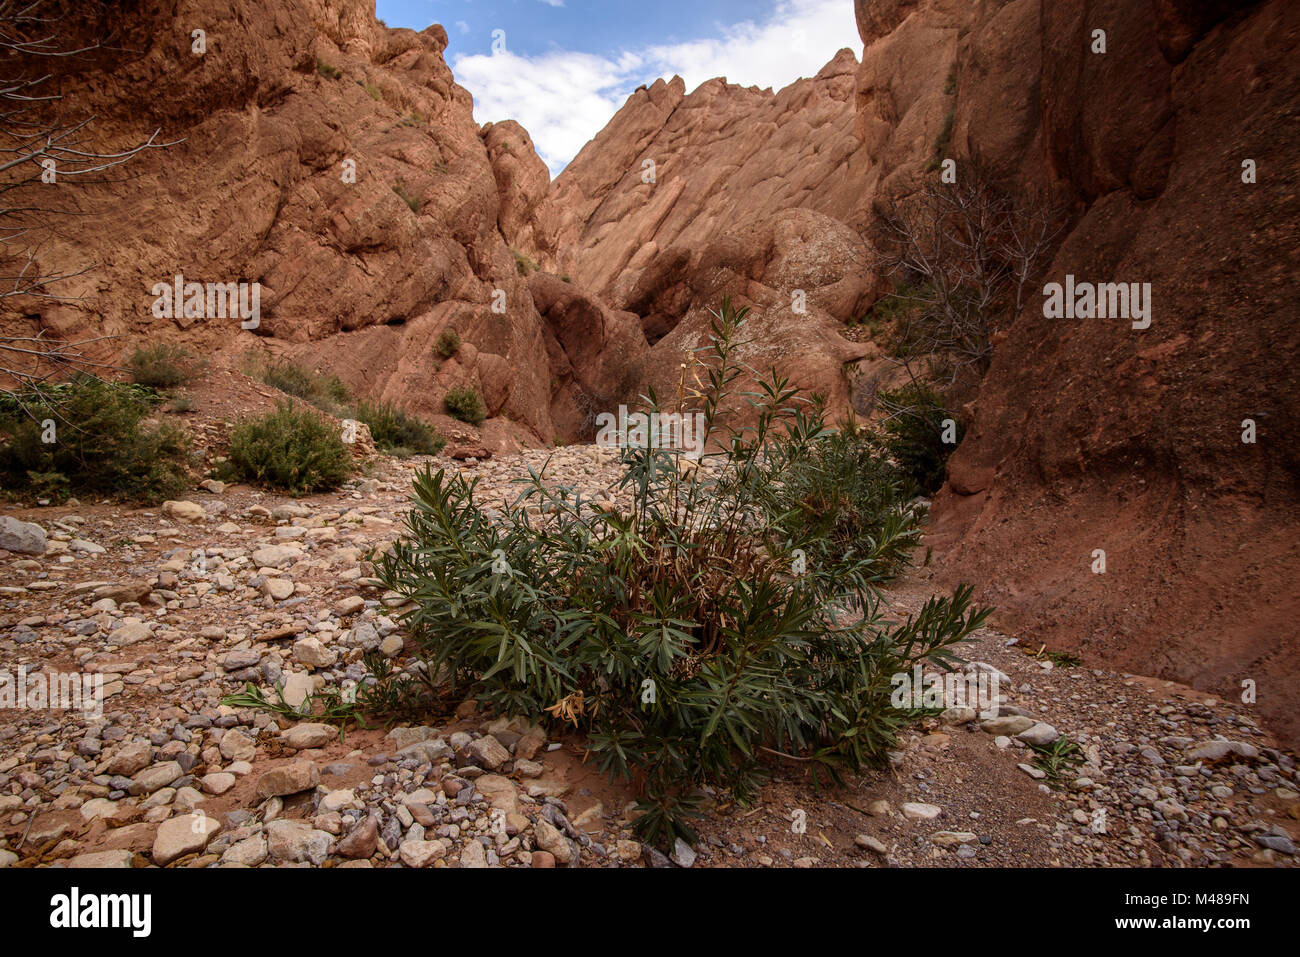 Scenic landscape in Dades Gorges, Atlas Mountains, Morocco Stock Photo